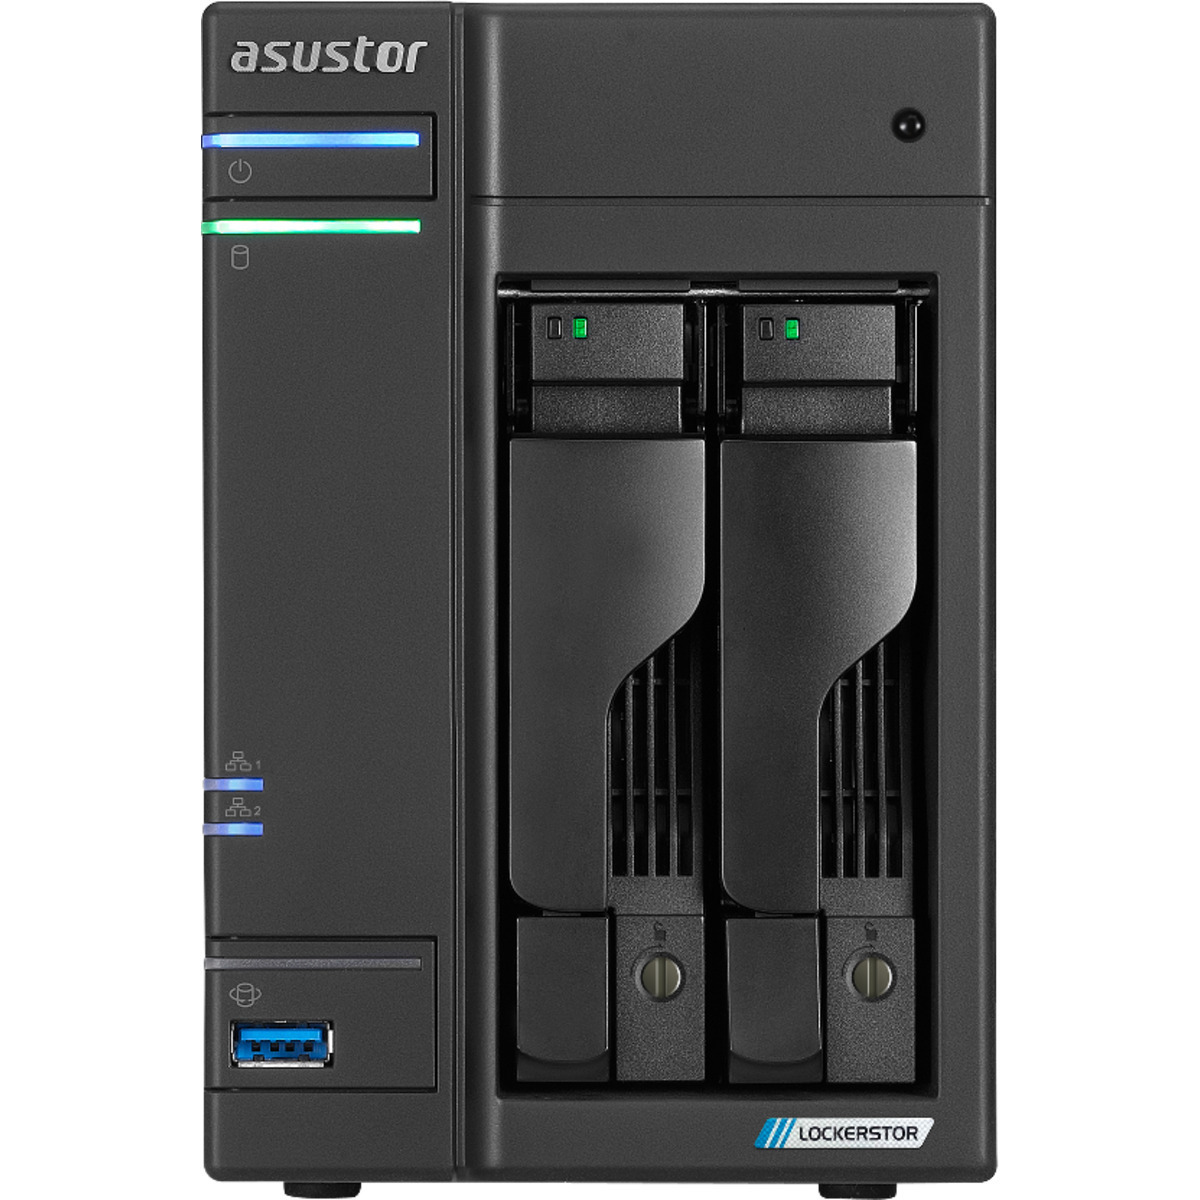 buy ASUSTOR LOCKERSTOR 2 Gen2 AS6702T 32tb Desktop NAS - Network Attached Storage Device 2x16000gb Western Digital Ultrastar DC HC550 WUH721816ALE6L4 3.5 7200rpm SATA 6Gb/s HDD ENTERPRISE Class Drives Installed - Burn-In Tested - ON SALE - FREE RAM UPGRADE - nas headquarters buy network attached storage server device das new raid-5 free shipping usa spring sale LOCKERSTOR 2 Gen2 AS6702T